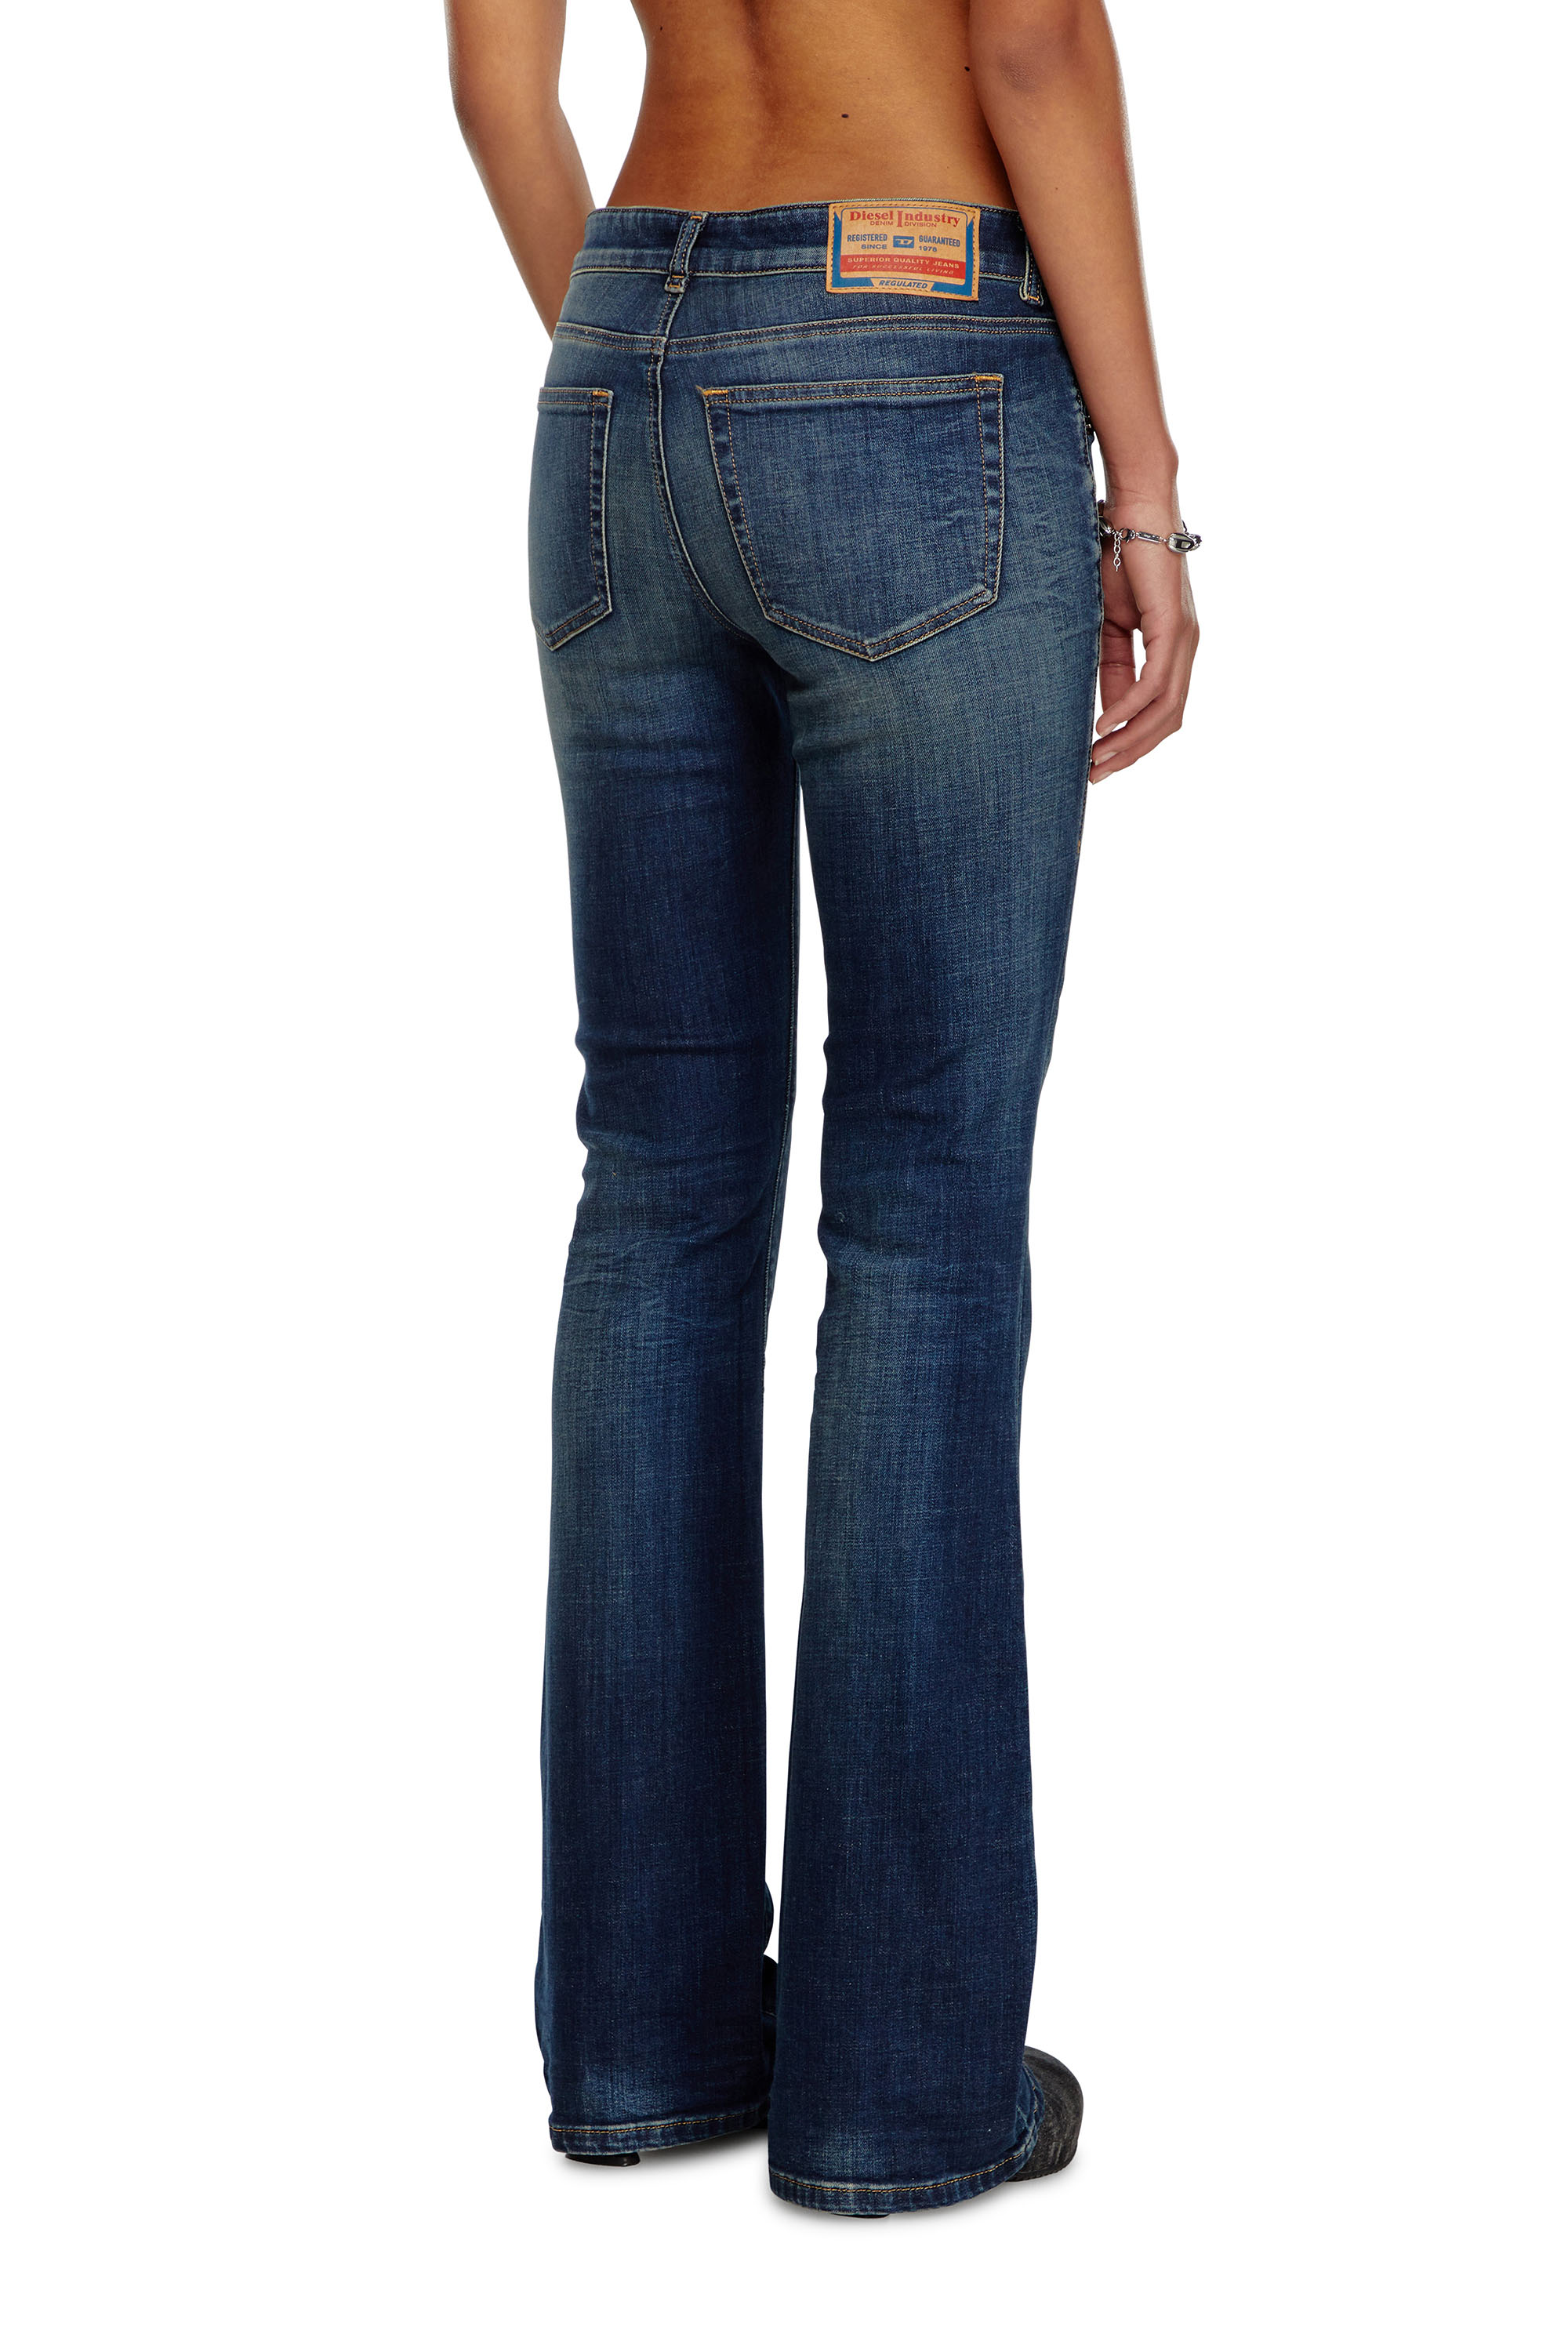 Diesel - Bootcut and Flare Jeans 1969 D-Ebbey 09J20, Mujer Bootcut y Flare Jeans - 1969 D-Ebbey in Azul marino - Image 4